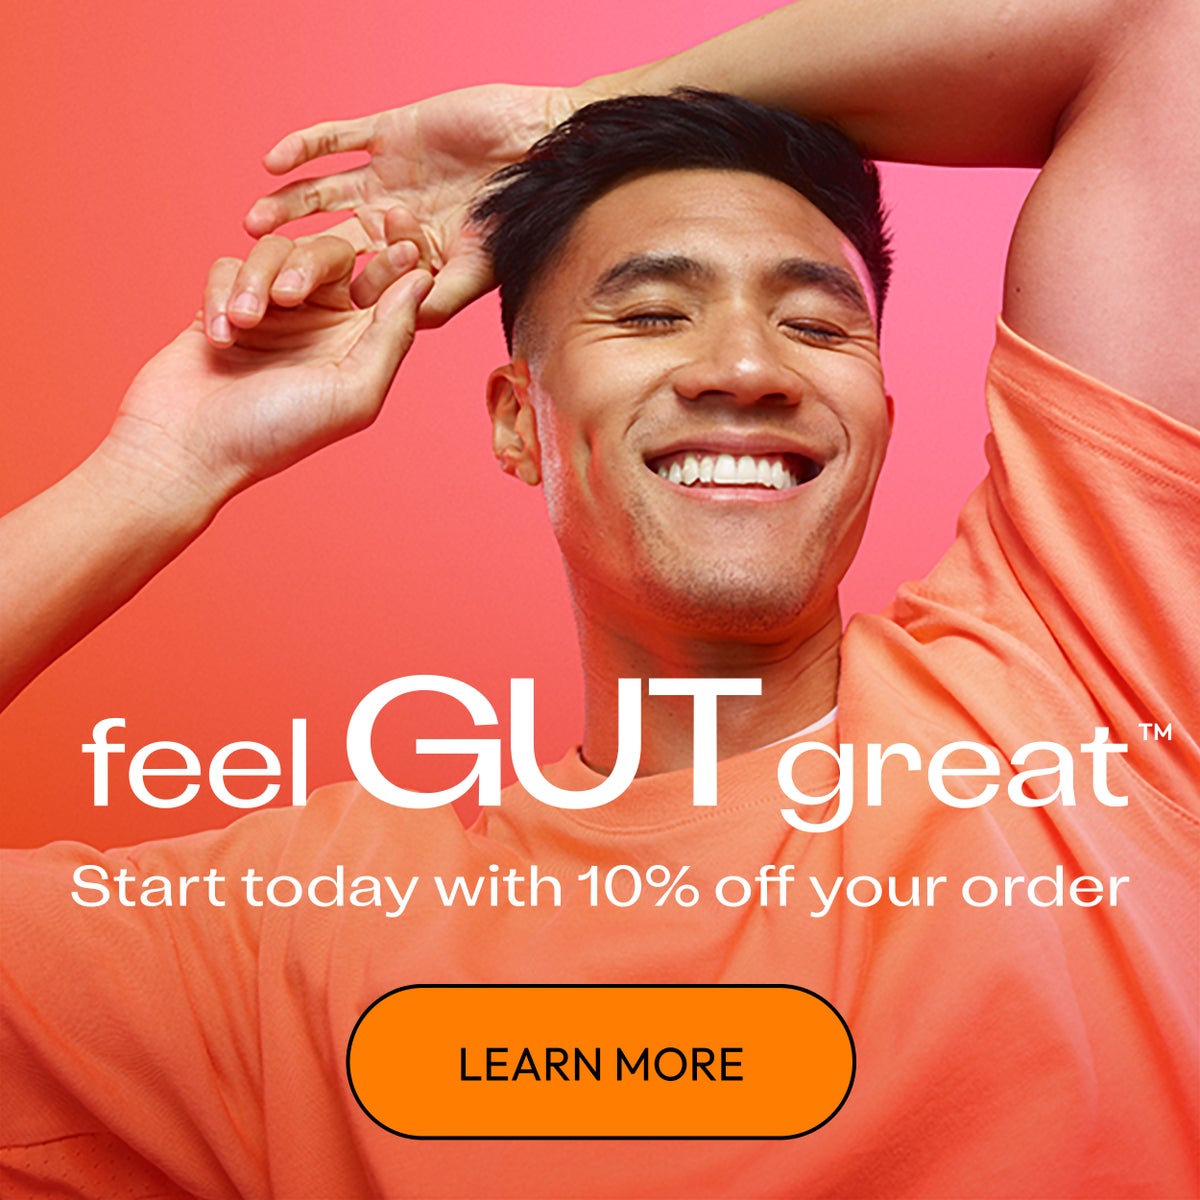 Feel Gut Great .Start today with 10% off your order. Learn more